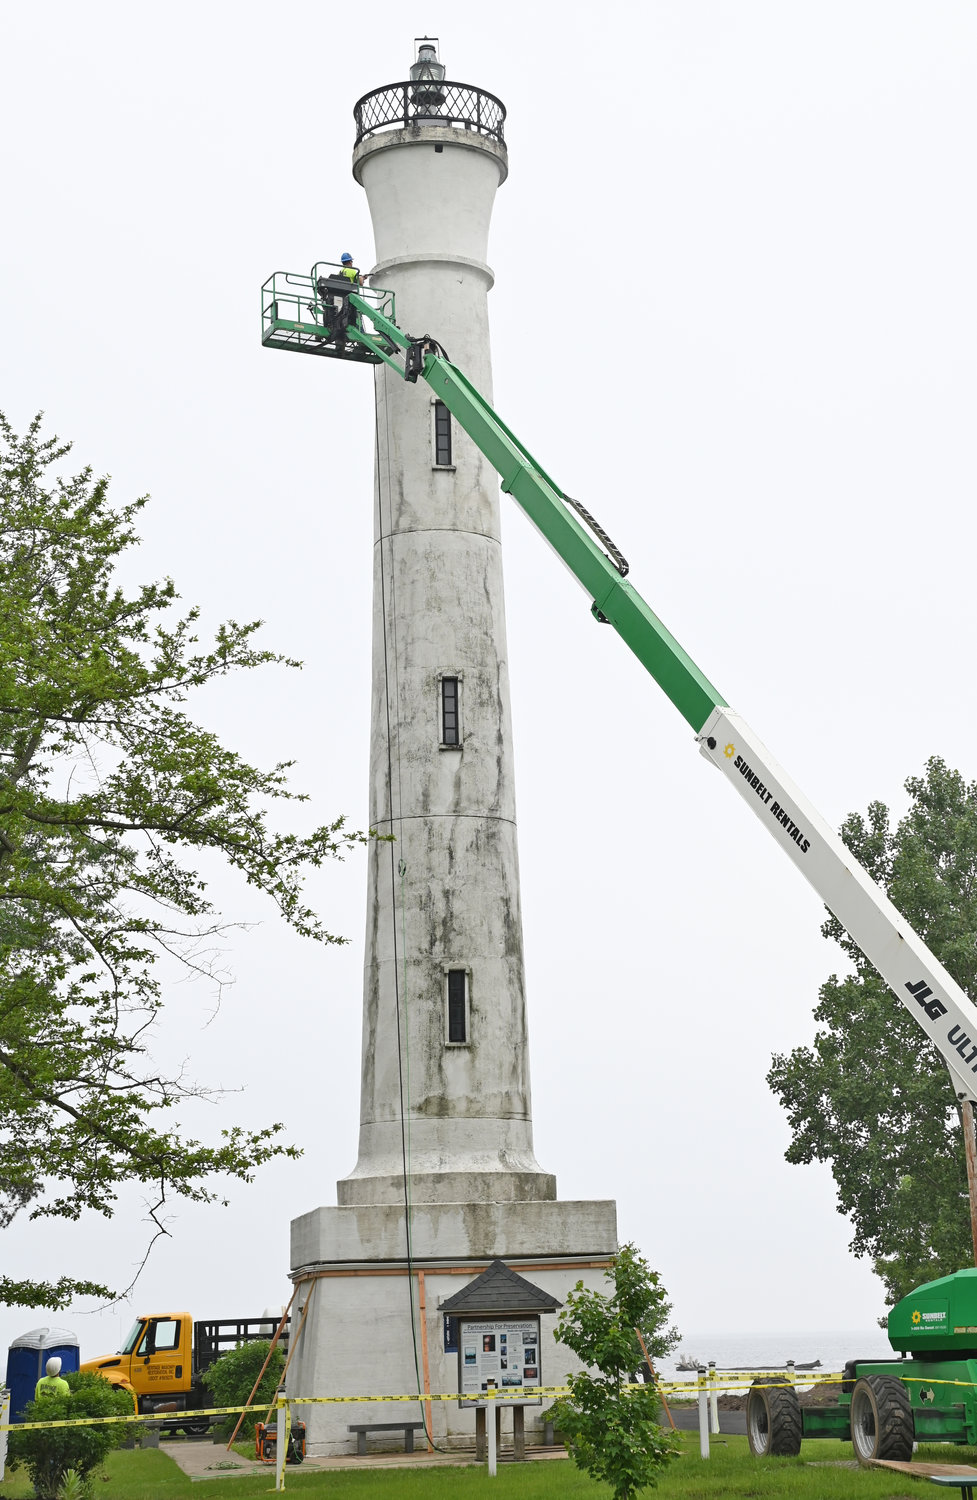 LIGHTING THE WAY — New York Power Authority crews pressure wash the Verona Beach Lighthouse in this file photo taken in June. LED lights have been installed at the historic structure as part of a vision to attract future visitors and help shine a spotlight on the historic structure and its place along the Erie Canal and Oneida Lake.